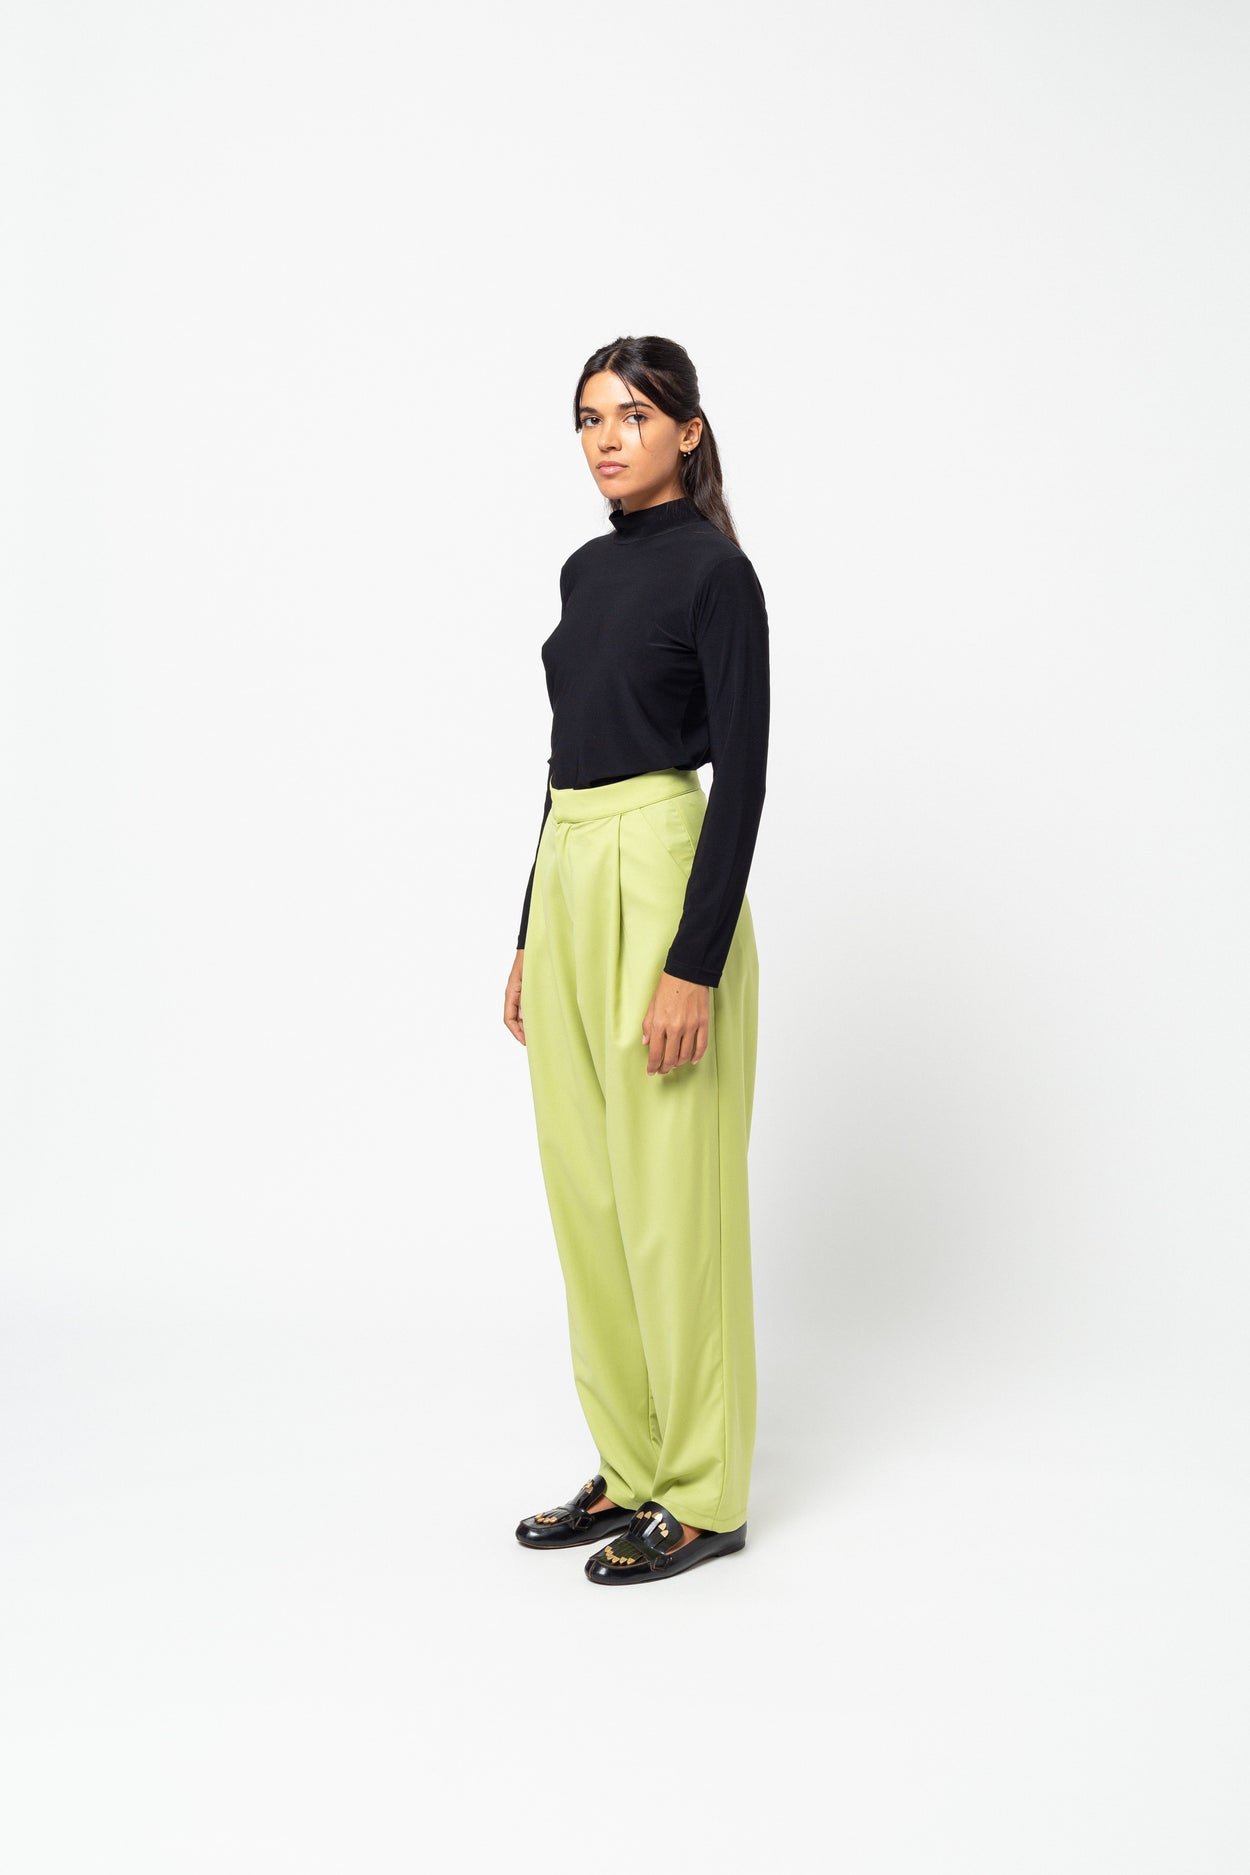 The Loose Lime Pant